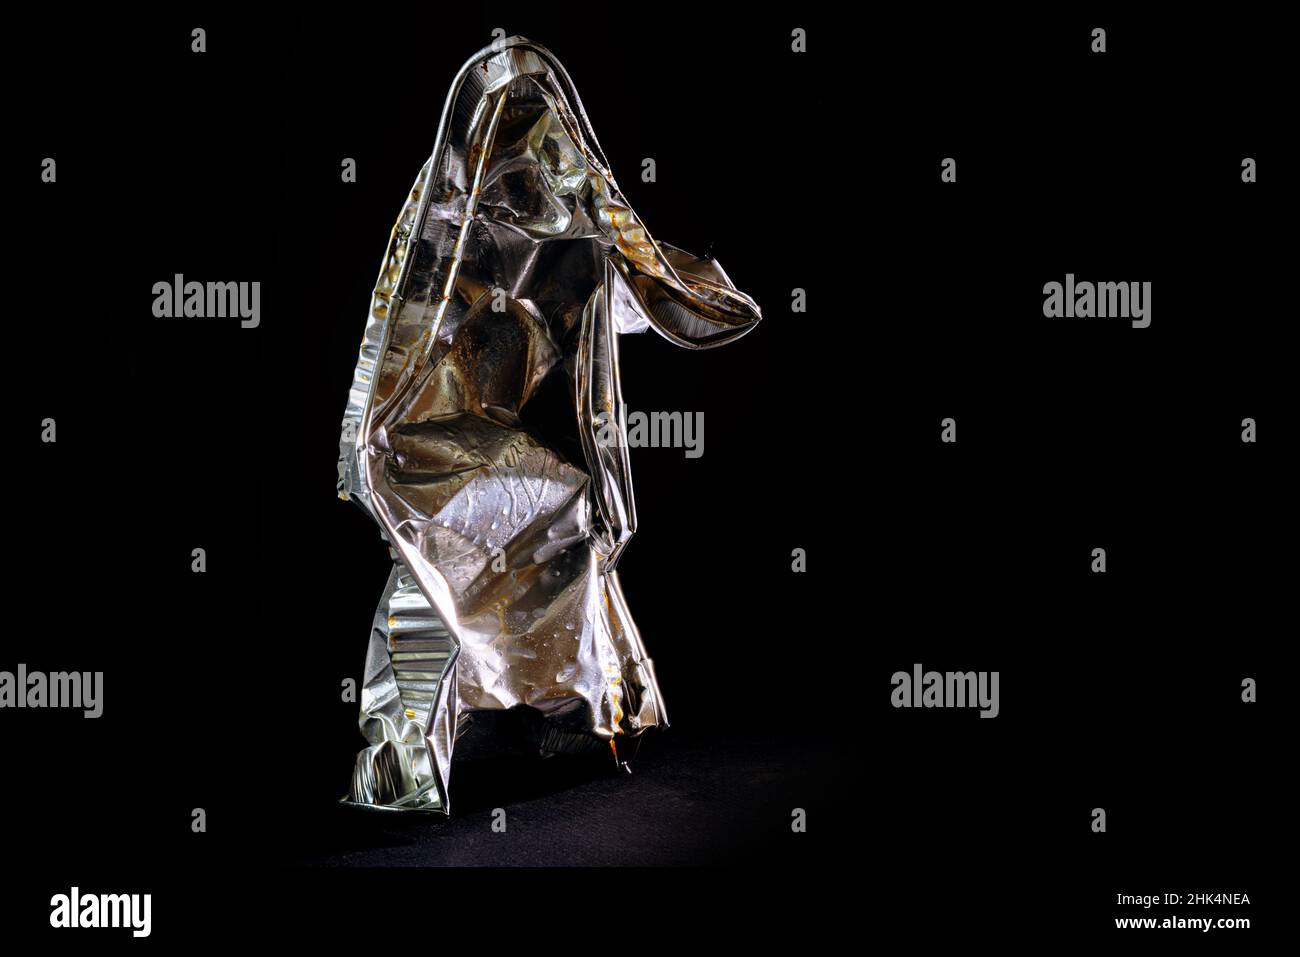 Aluminum foil tray of convenience food shown like a human art sculpture against a black background, avoidable waste from disposable packaging use reso Stock Photo